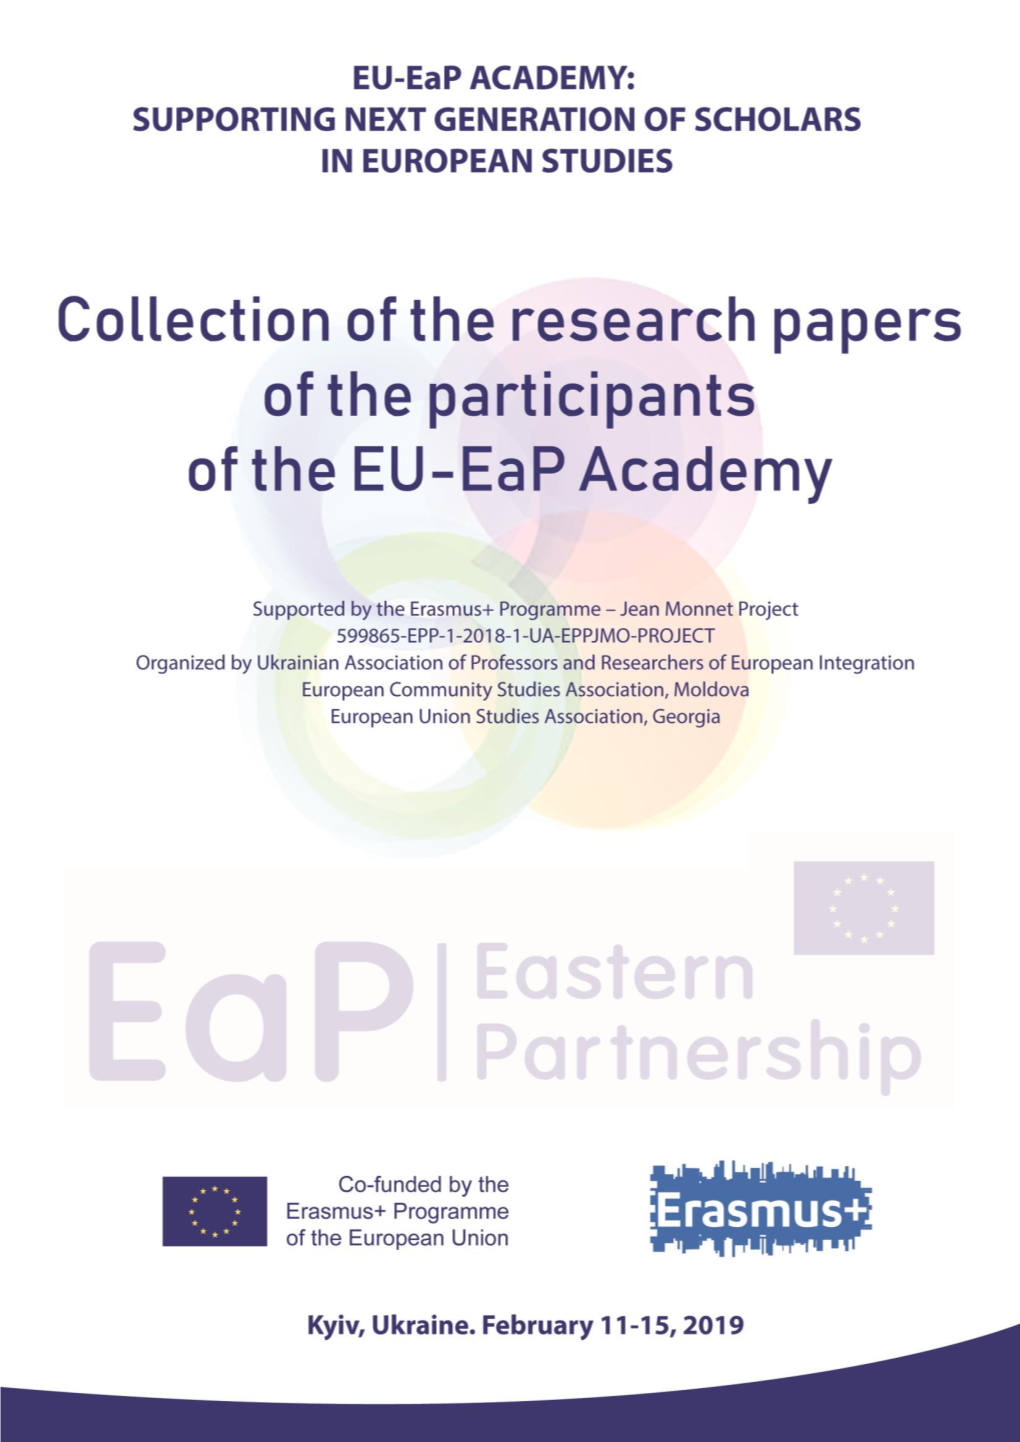 Collection of the Research Papers. EU-Eap Academy 2019